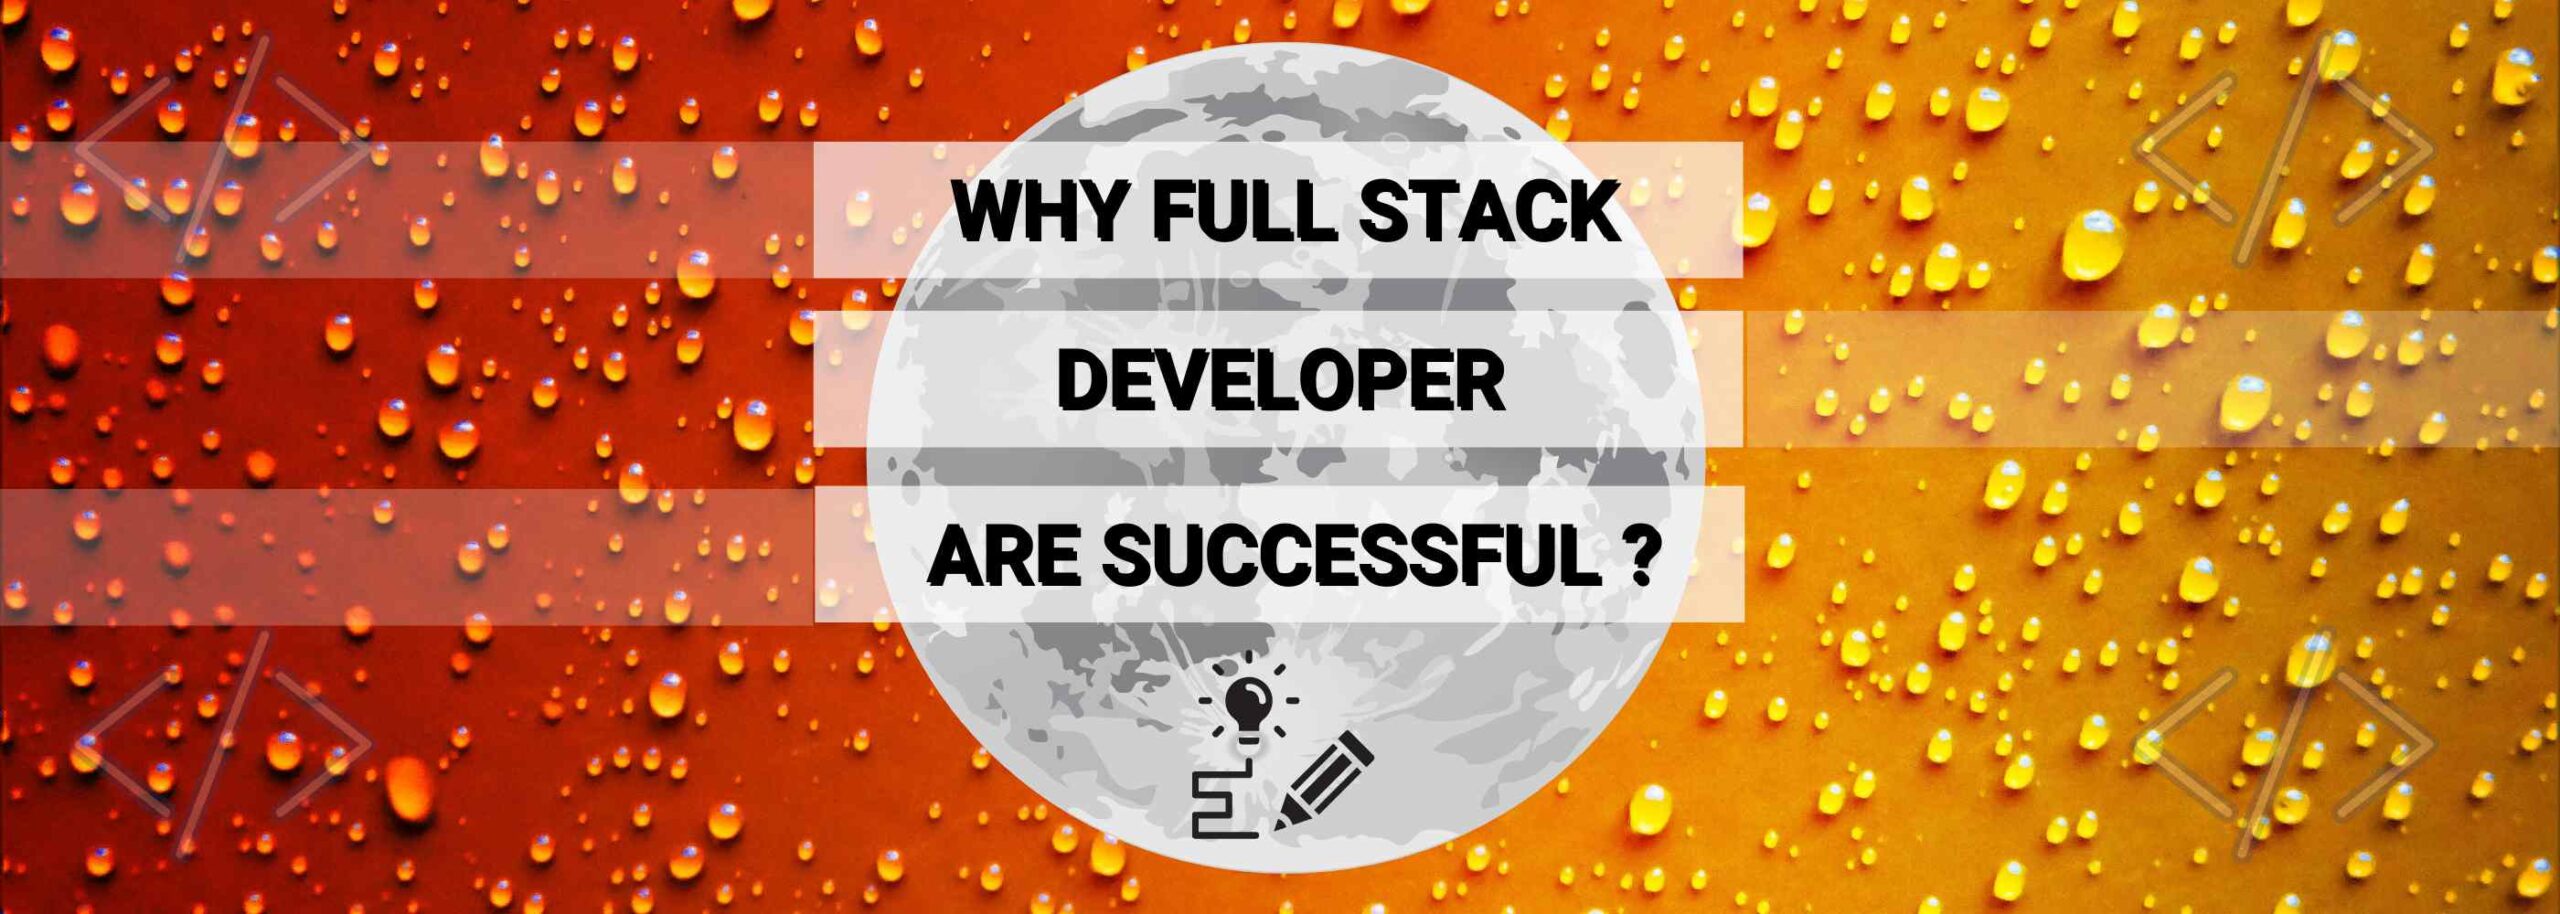 10 Reasons Why Full Stack Developer are Successful | Datatrained